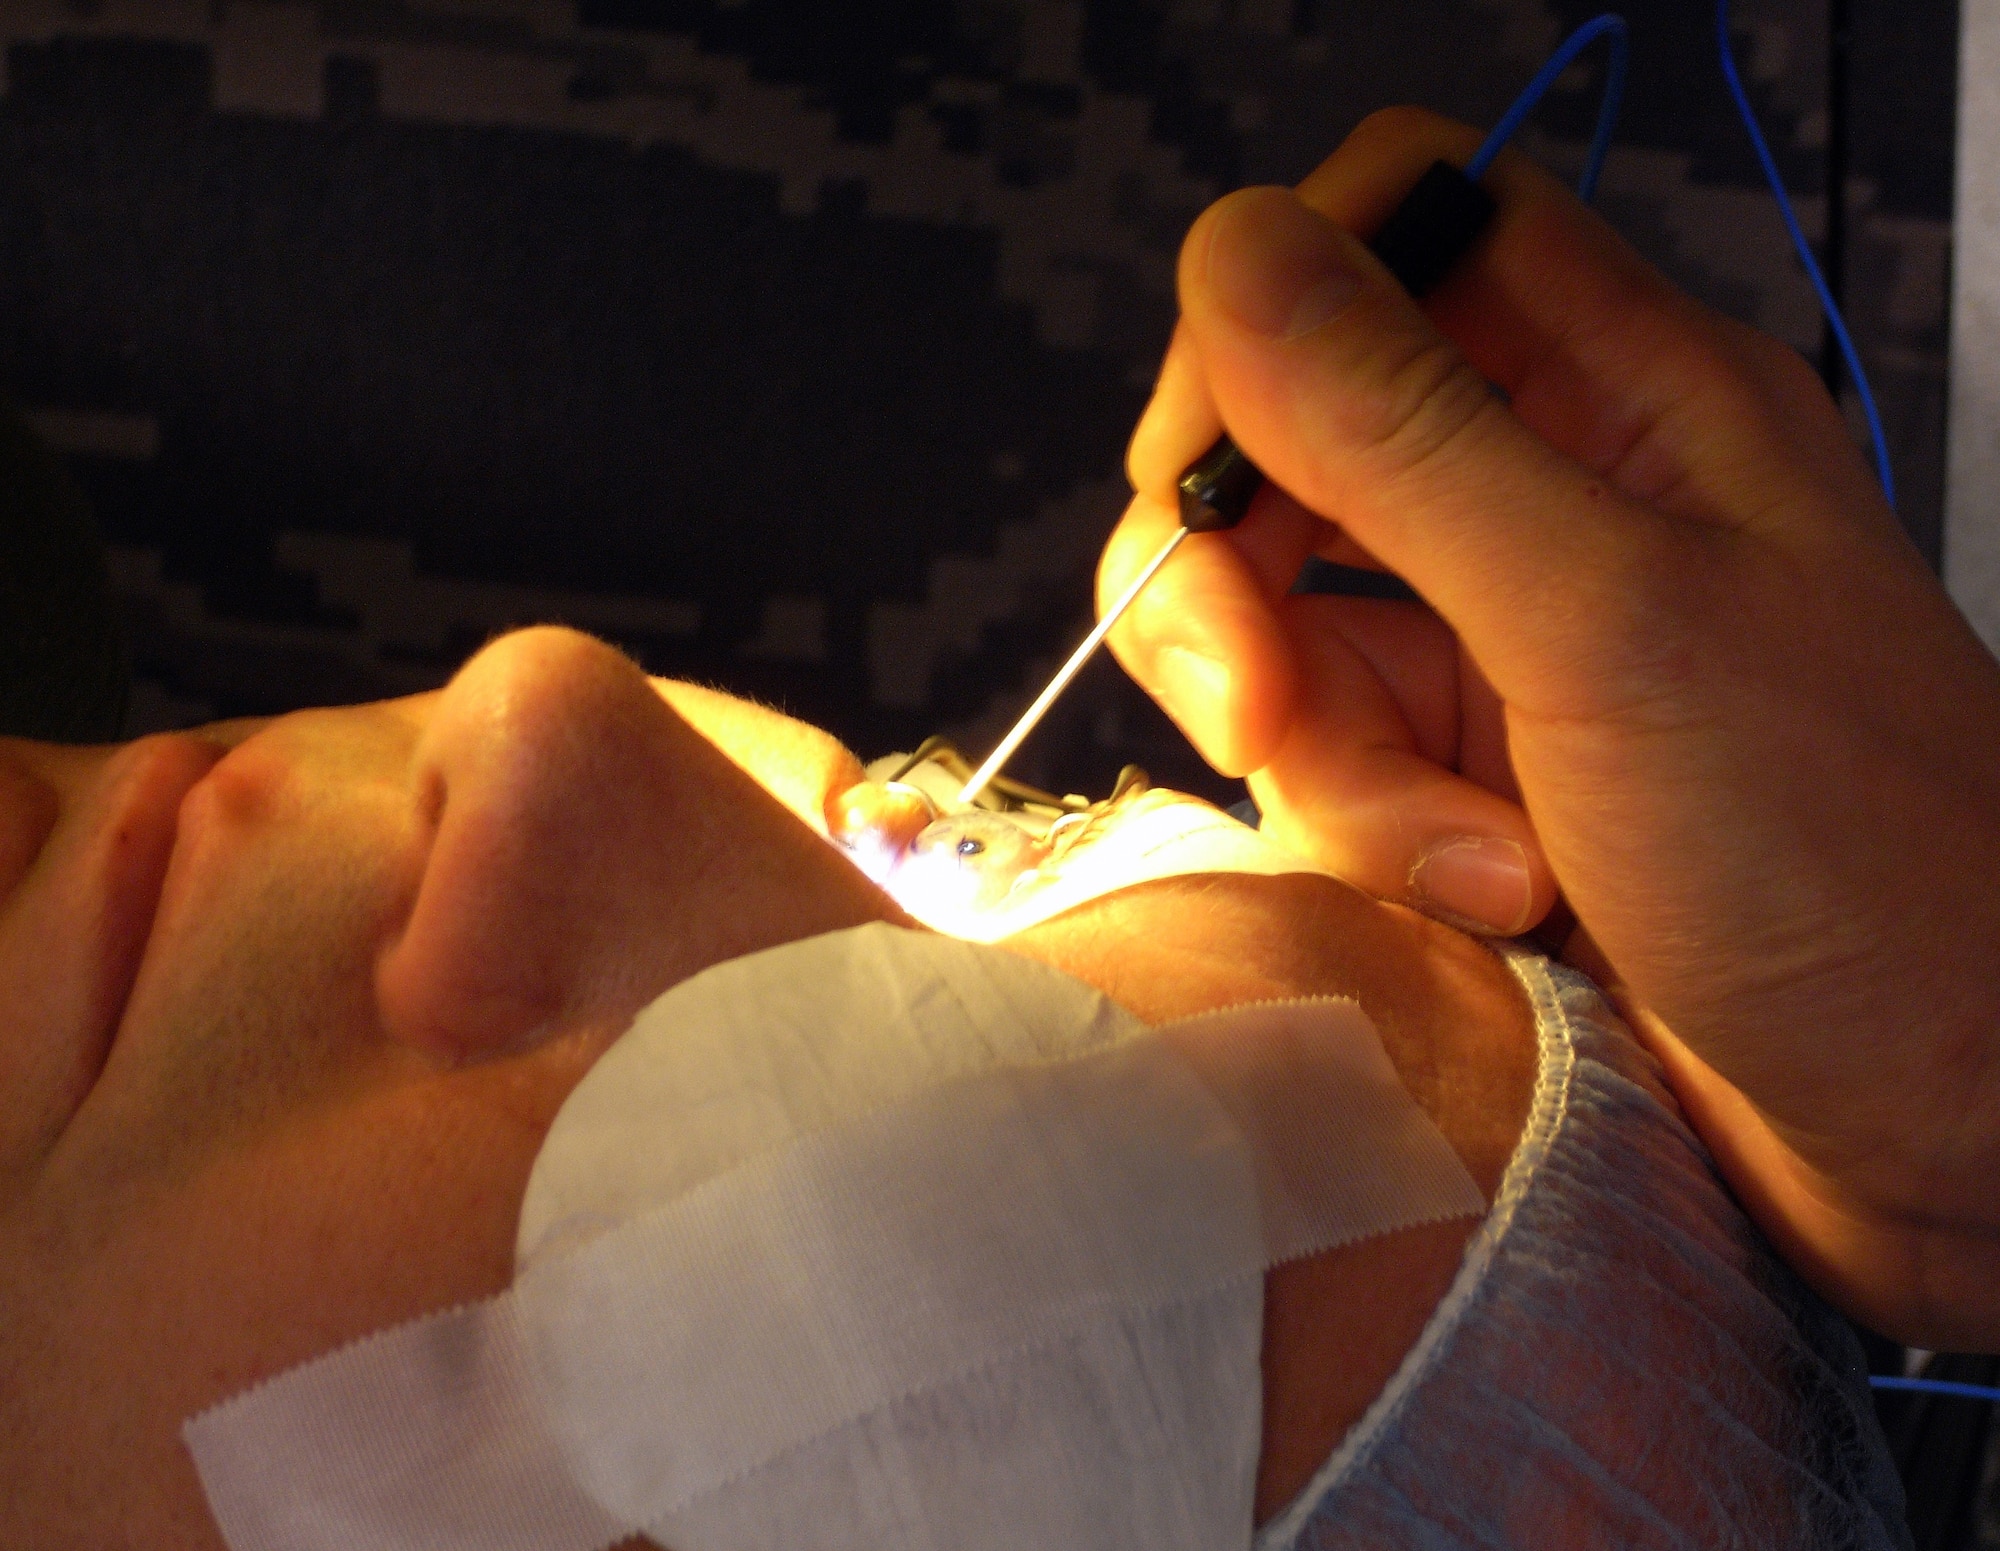 A patient's eye is prepared for photorefractive keratectomy at the Joint Warfighter Refractive Surgery Center, Lackland Air Force Base, Texas, on March 26.  Corrective eye surgery is avaliable to all qualified active duty personnel. (U.S. Air Force photo/Master Sgt. Kimberly A. Yearyean-Siers)                                  